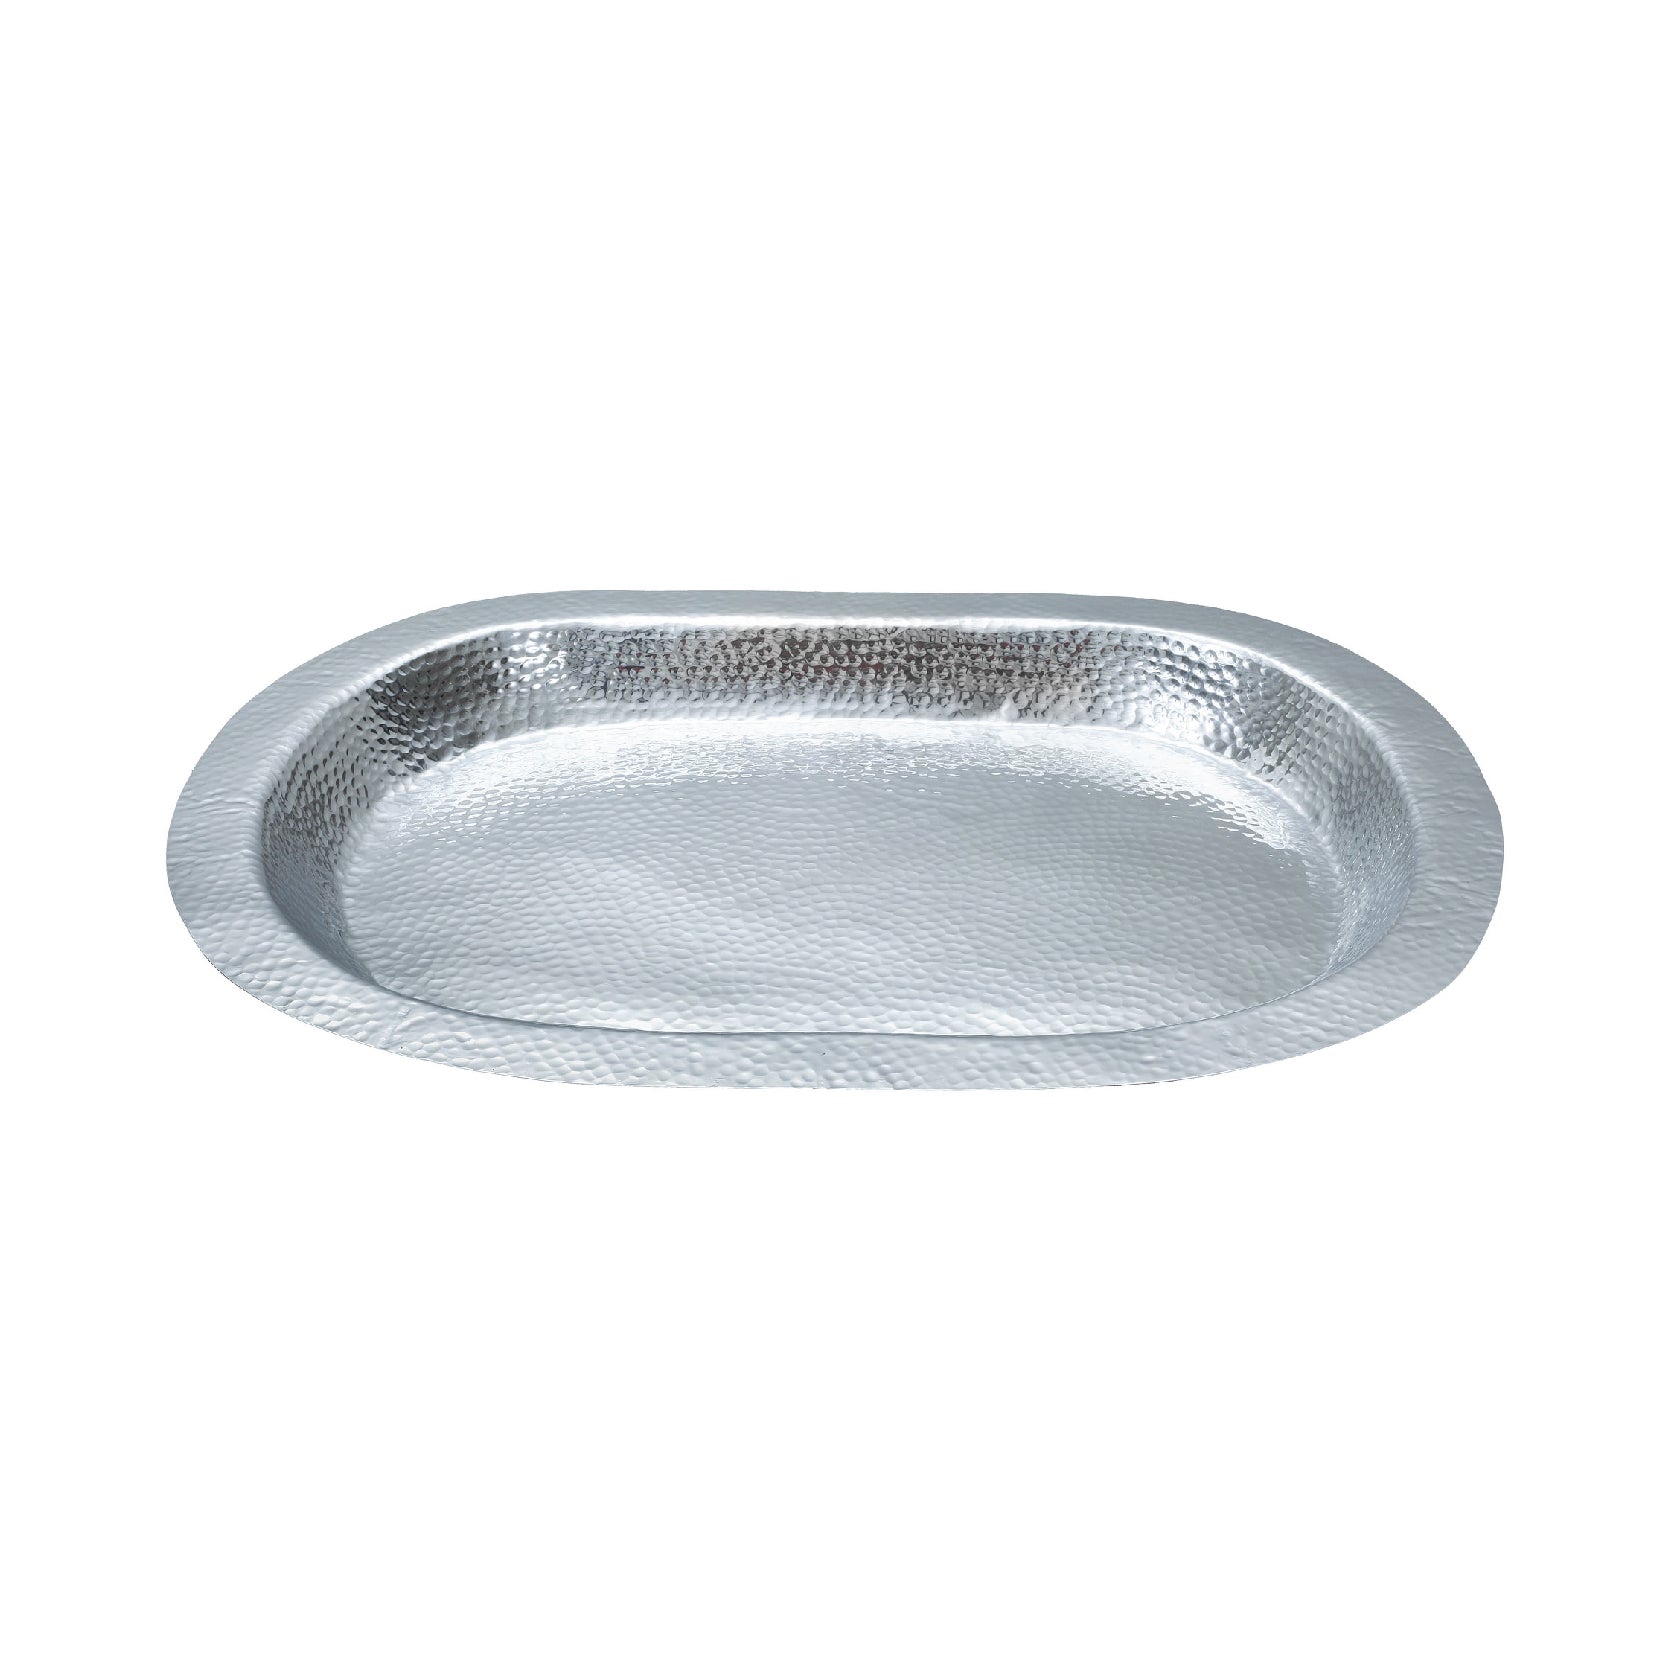 Hammered Oval Tray